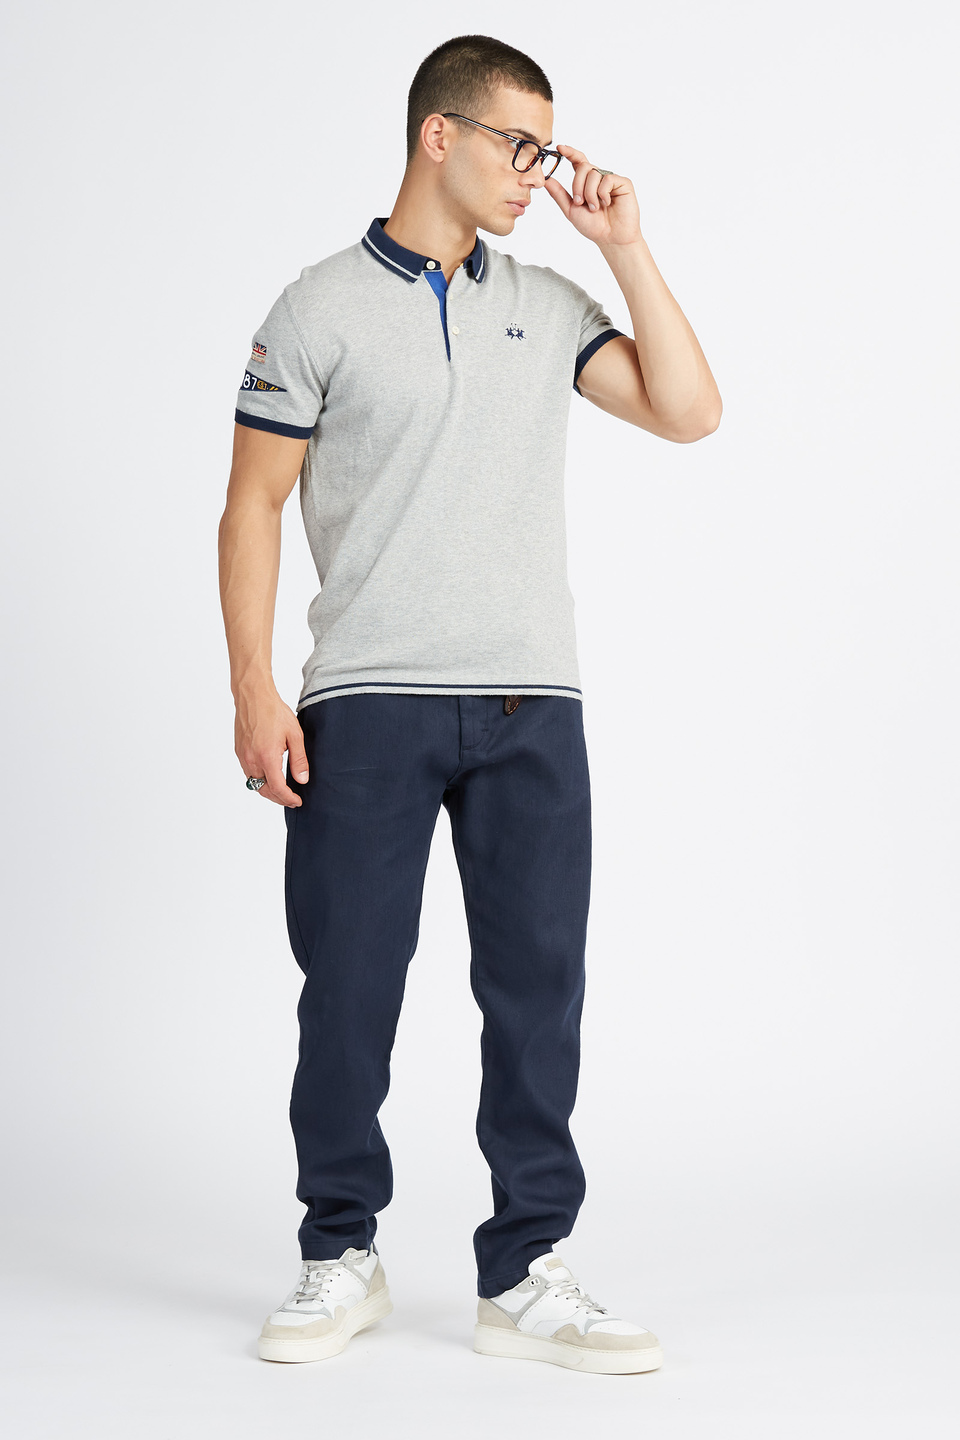 Short-sleeved men's tricot polo in solid color - Victorin | La Martina - Official Online Shop